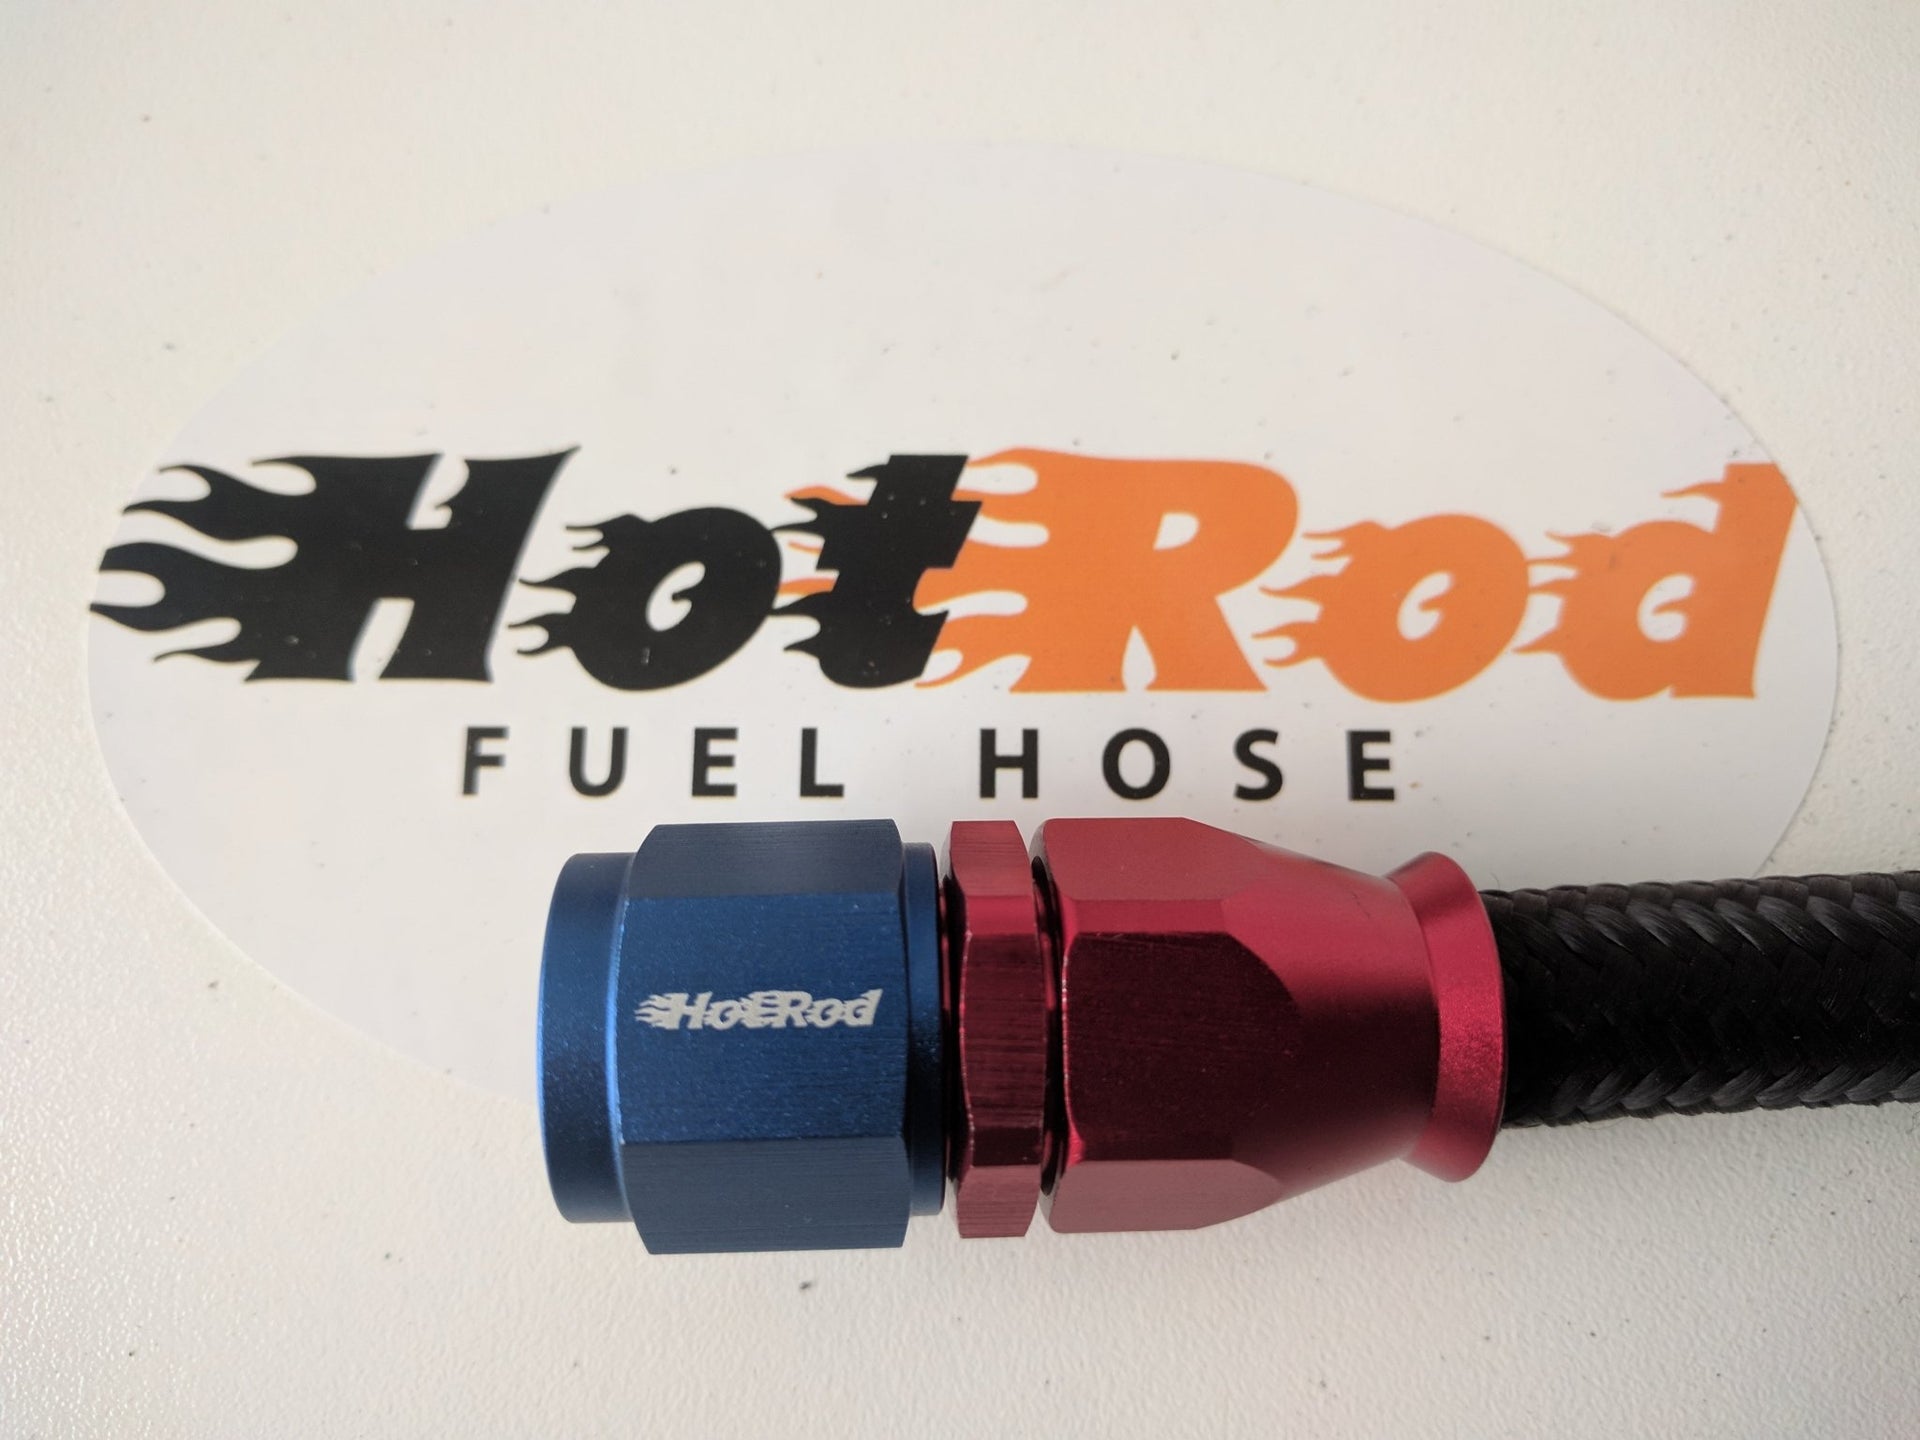 Hot Rod Fuel Hose - AN PTFE Lined Hose & Fittings for performance